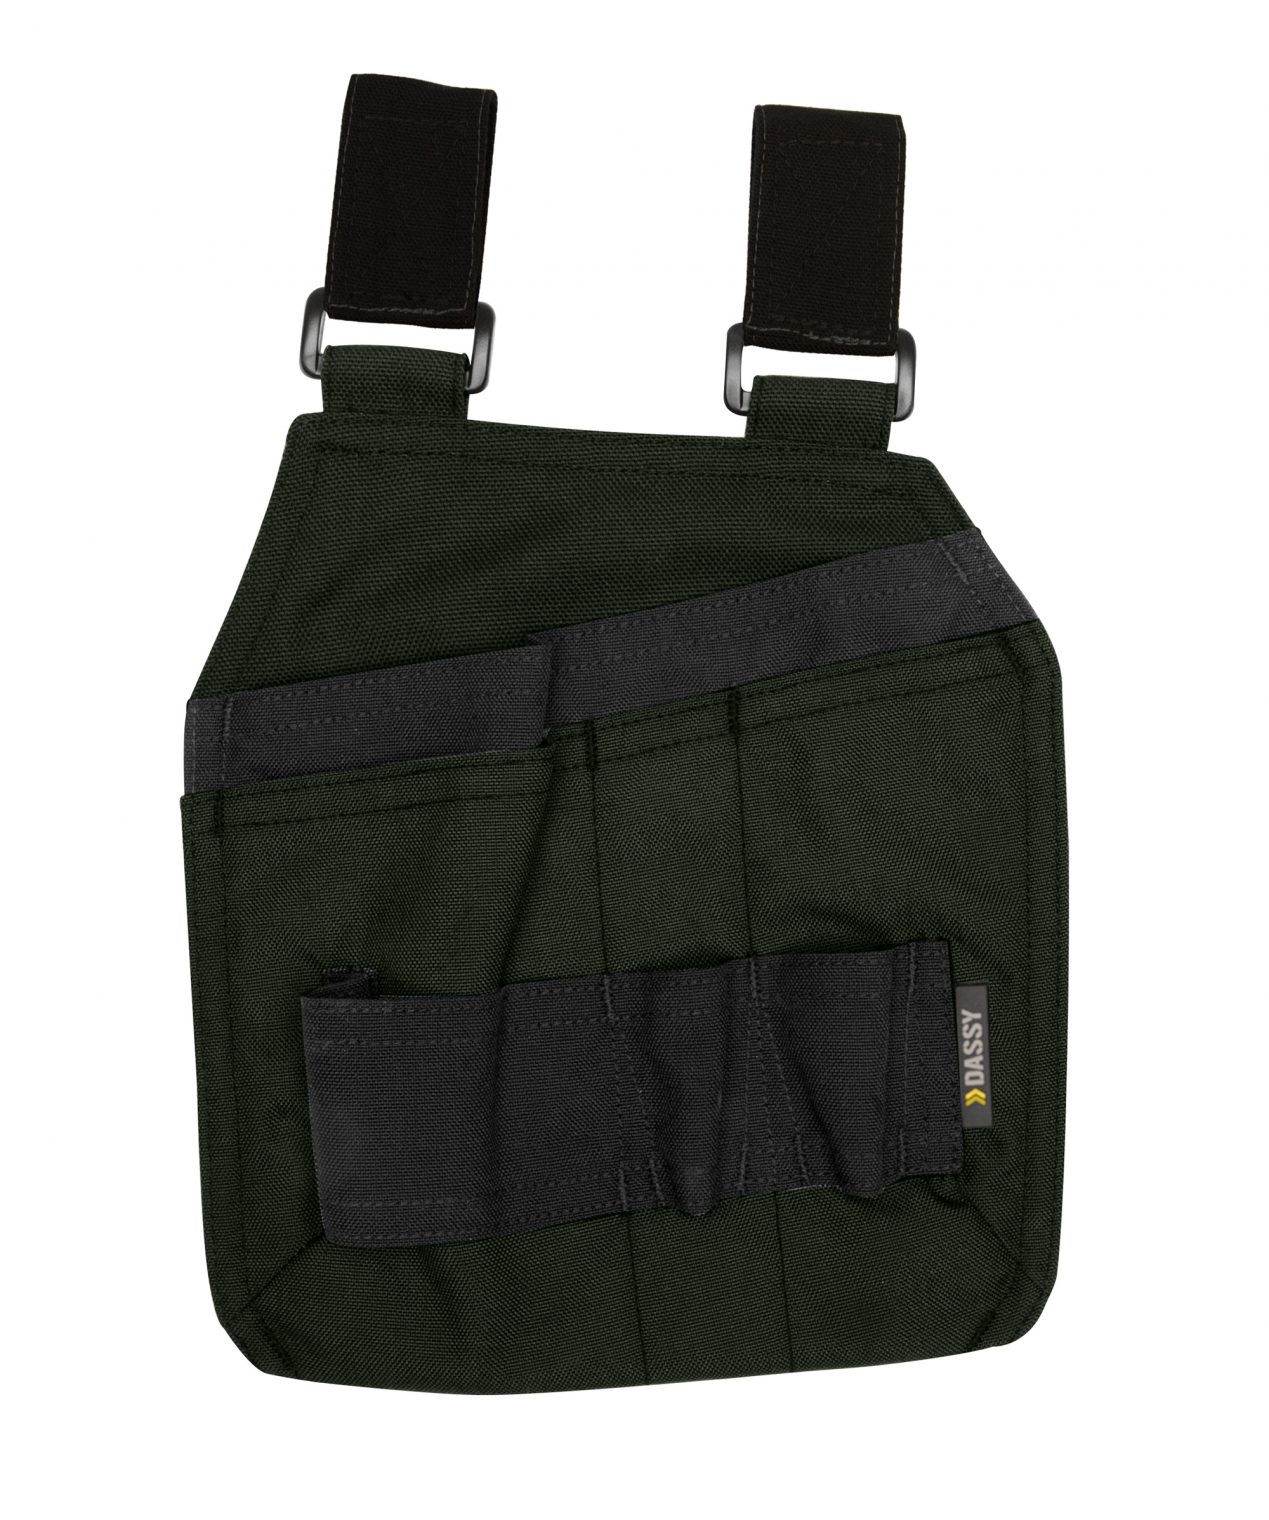 gordon with loops canvas tool pouches per pair with velcro loops moss green black front